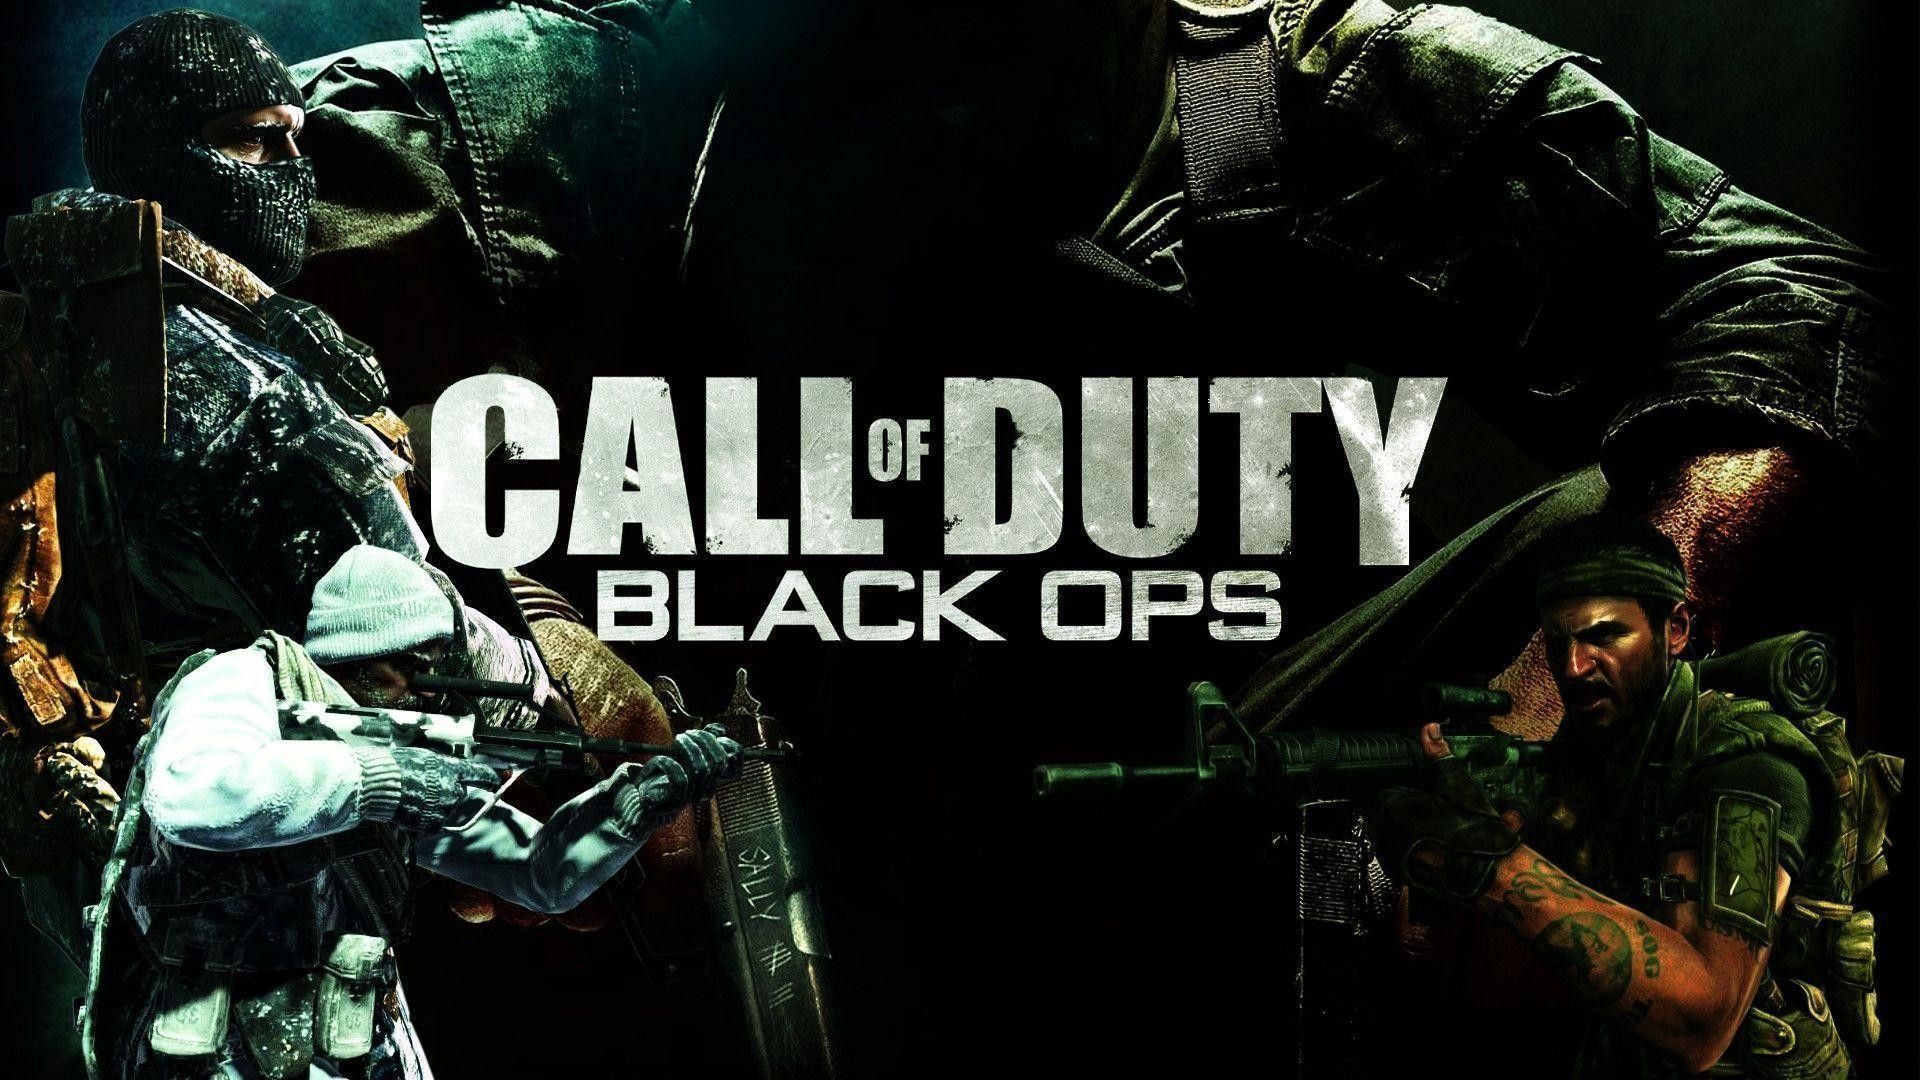 Black Ops Wallpapers 81 images